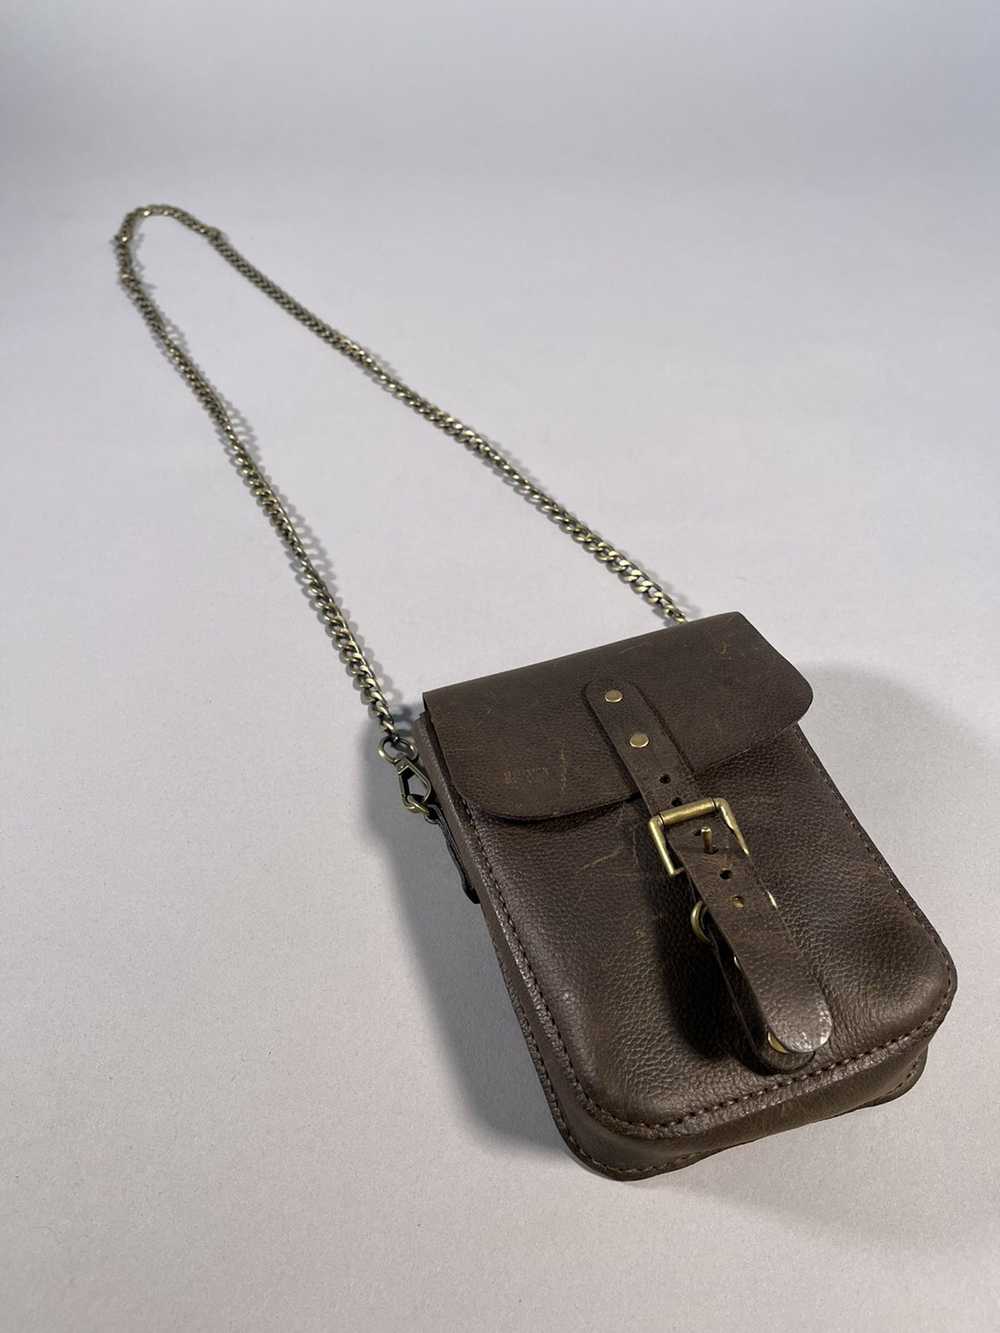 Leather × Vintage Vintage Leather Bag with Chain - image 3